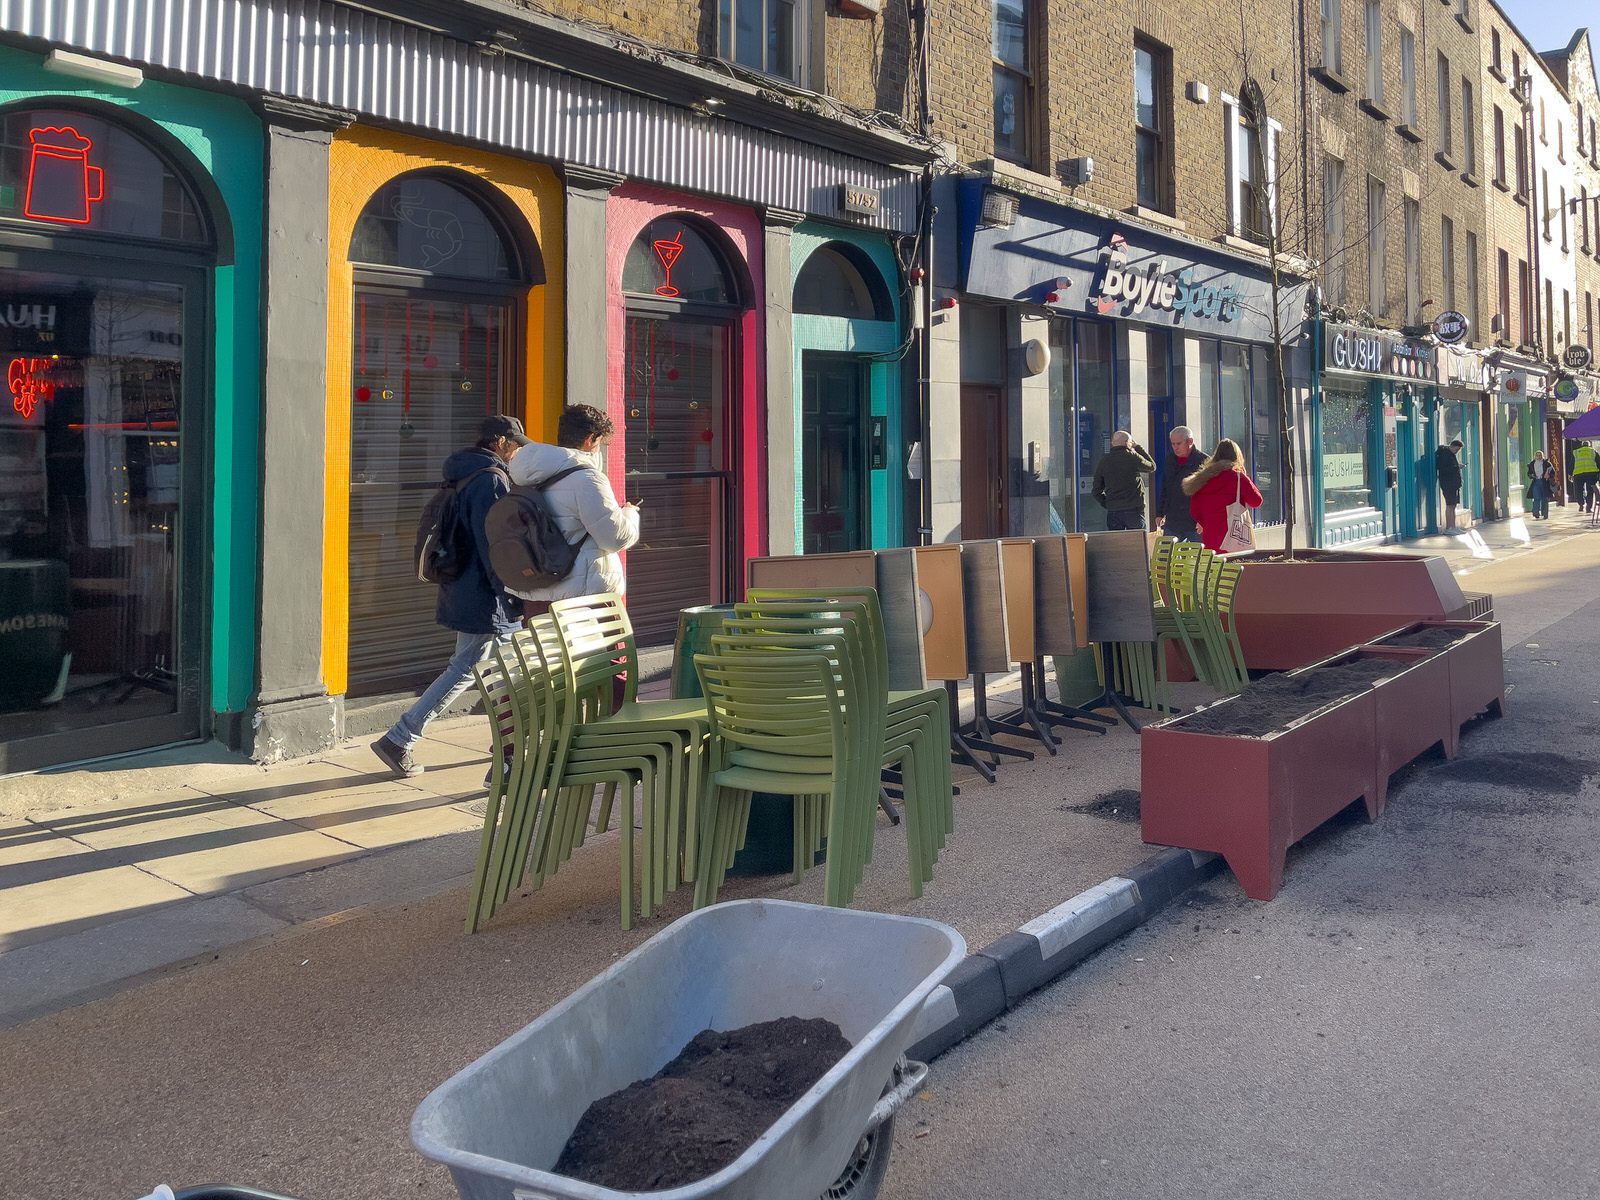 THE NEW STREET FURNITURE AND THE CHRISTMAS TREE [HAVE ARRIVED IN CAPEL STREET]-225858-1